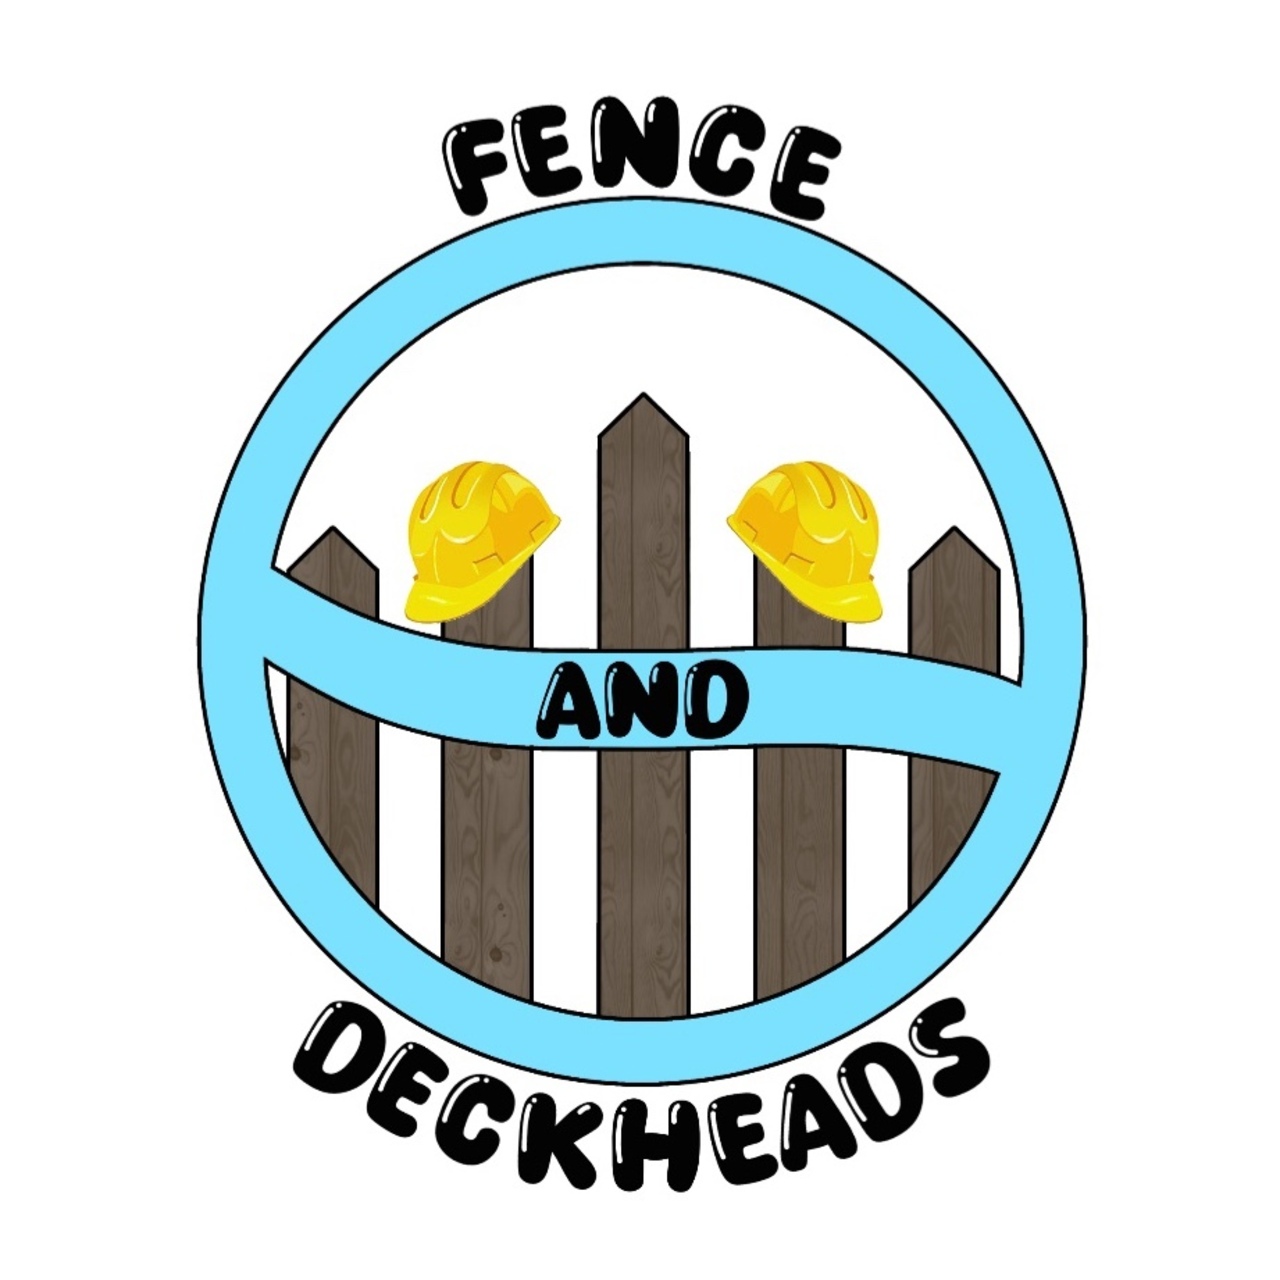 Fence and Deckheads's logo